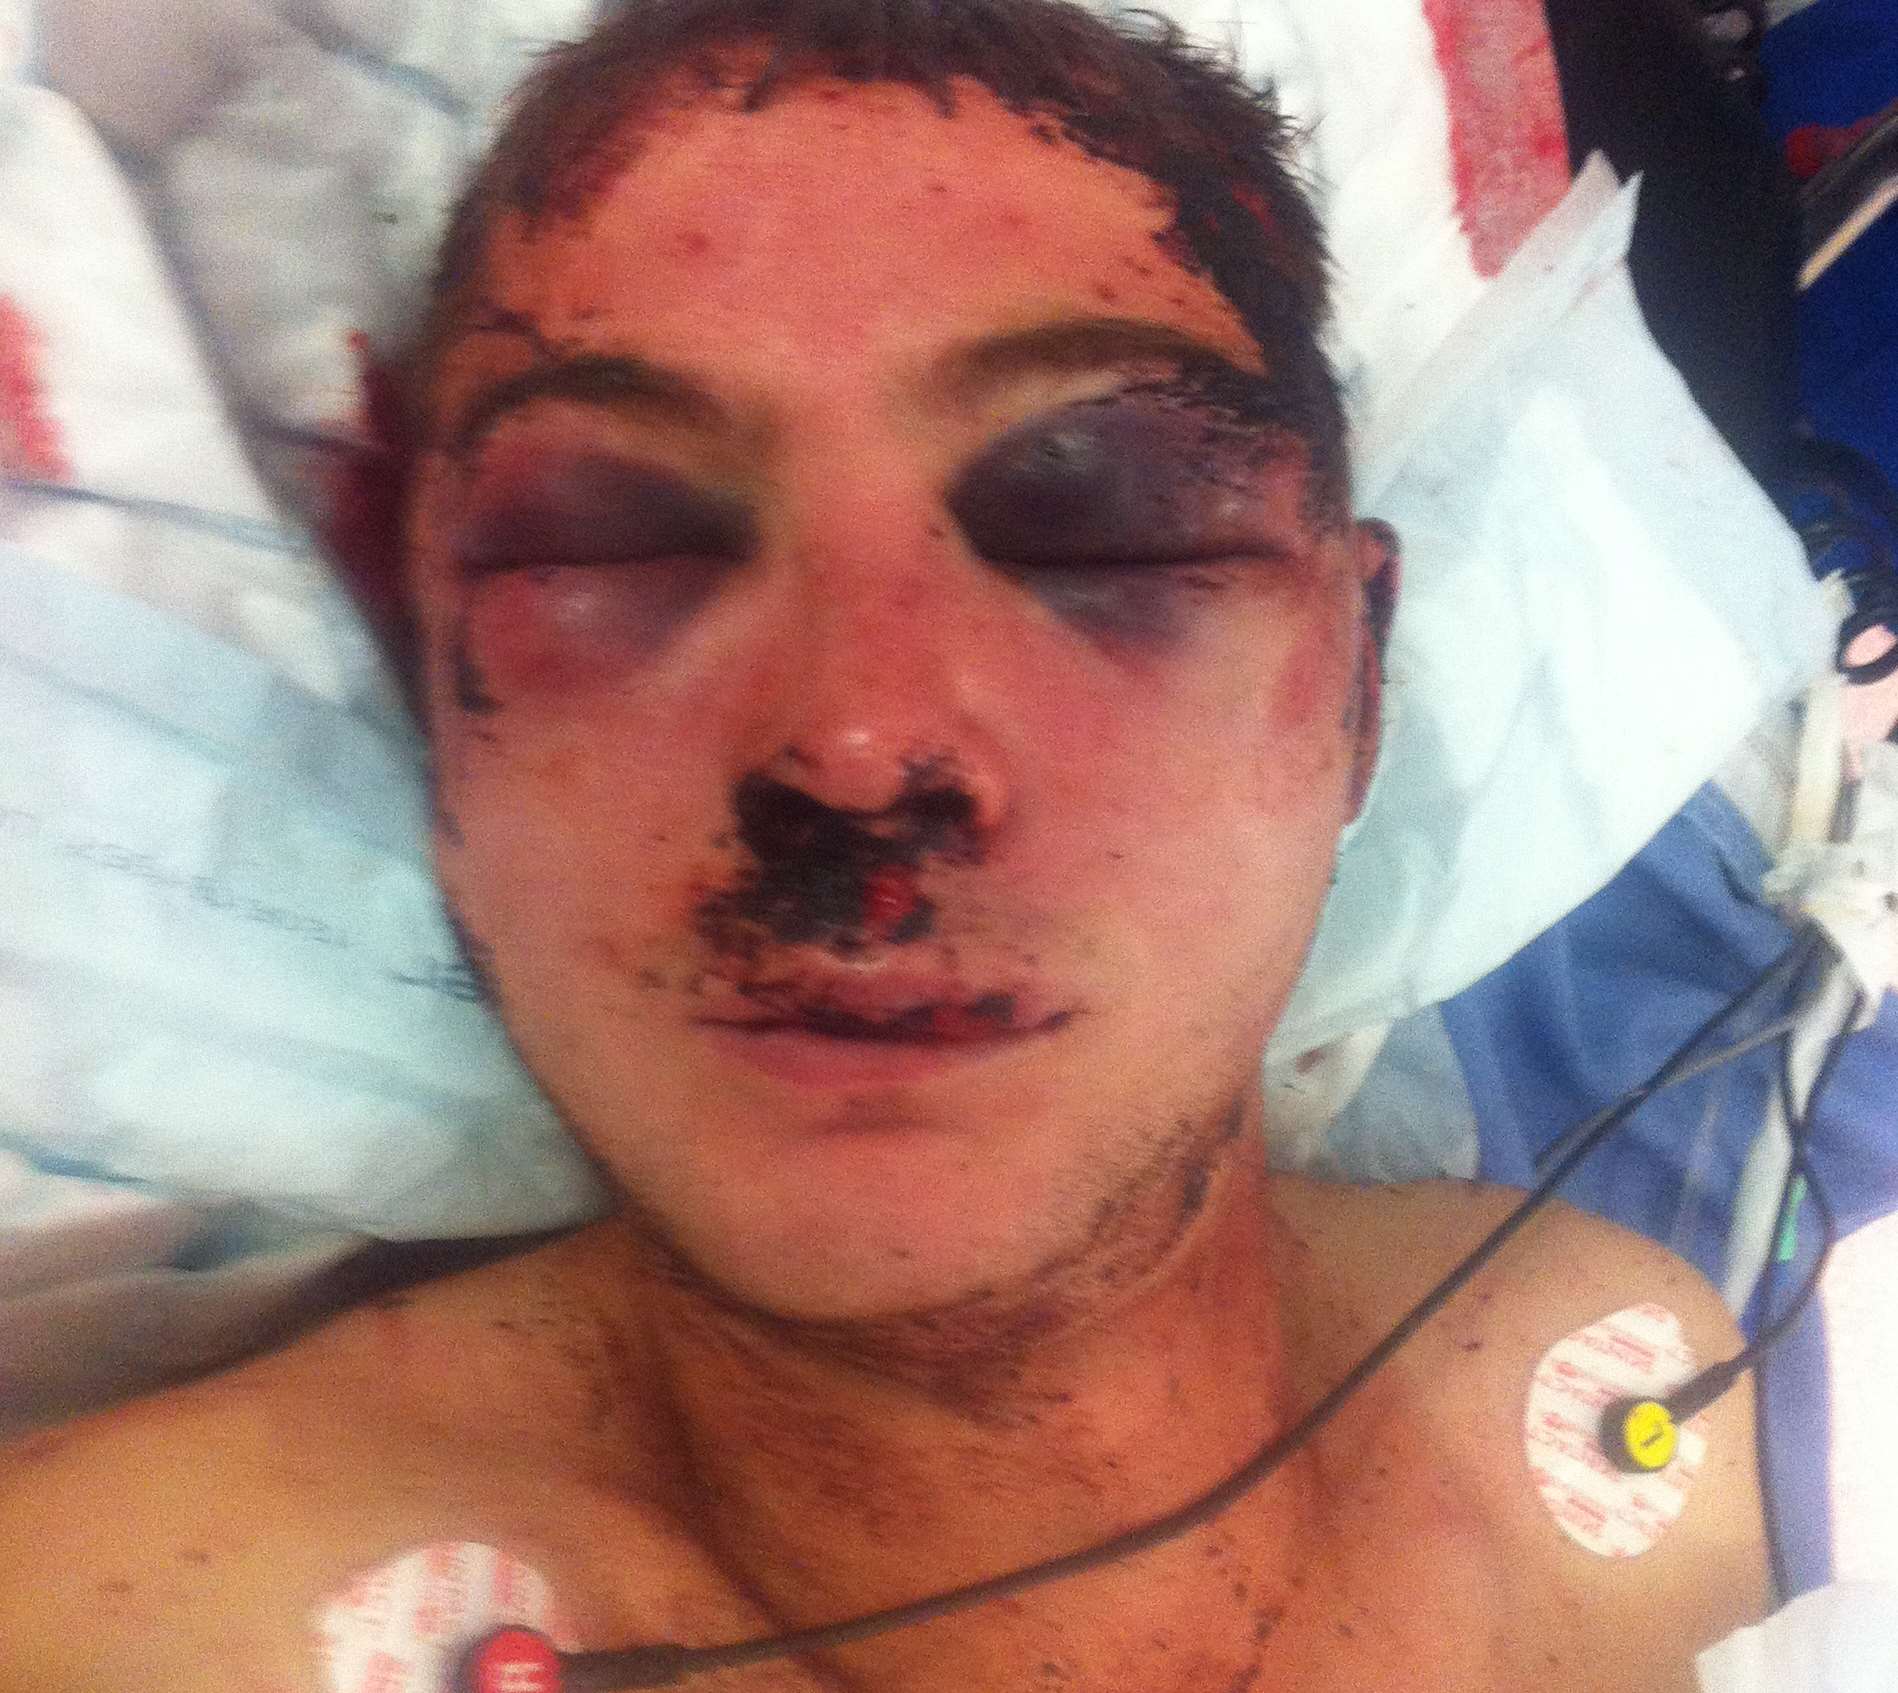 Victim Joe Bath's mother didn't recognise him after he was left for dead in a vicious attack